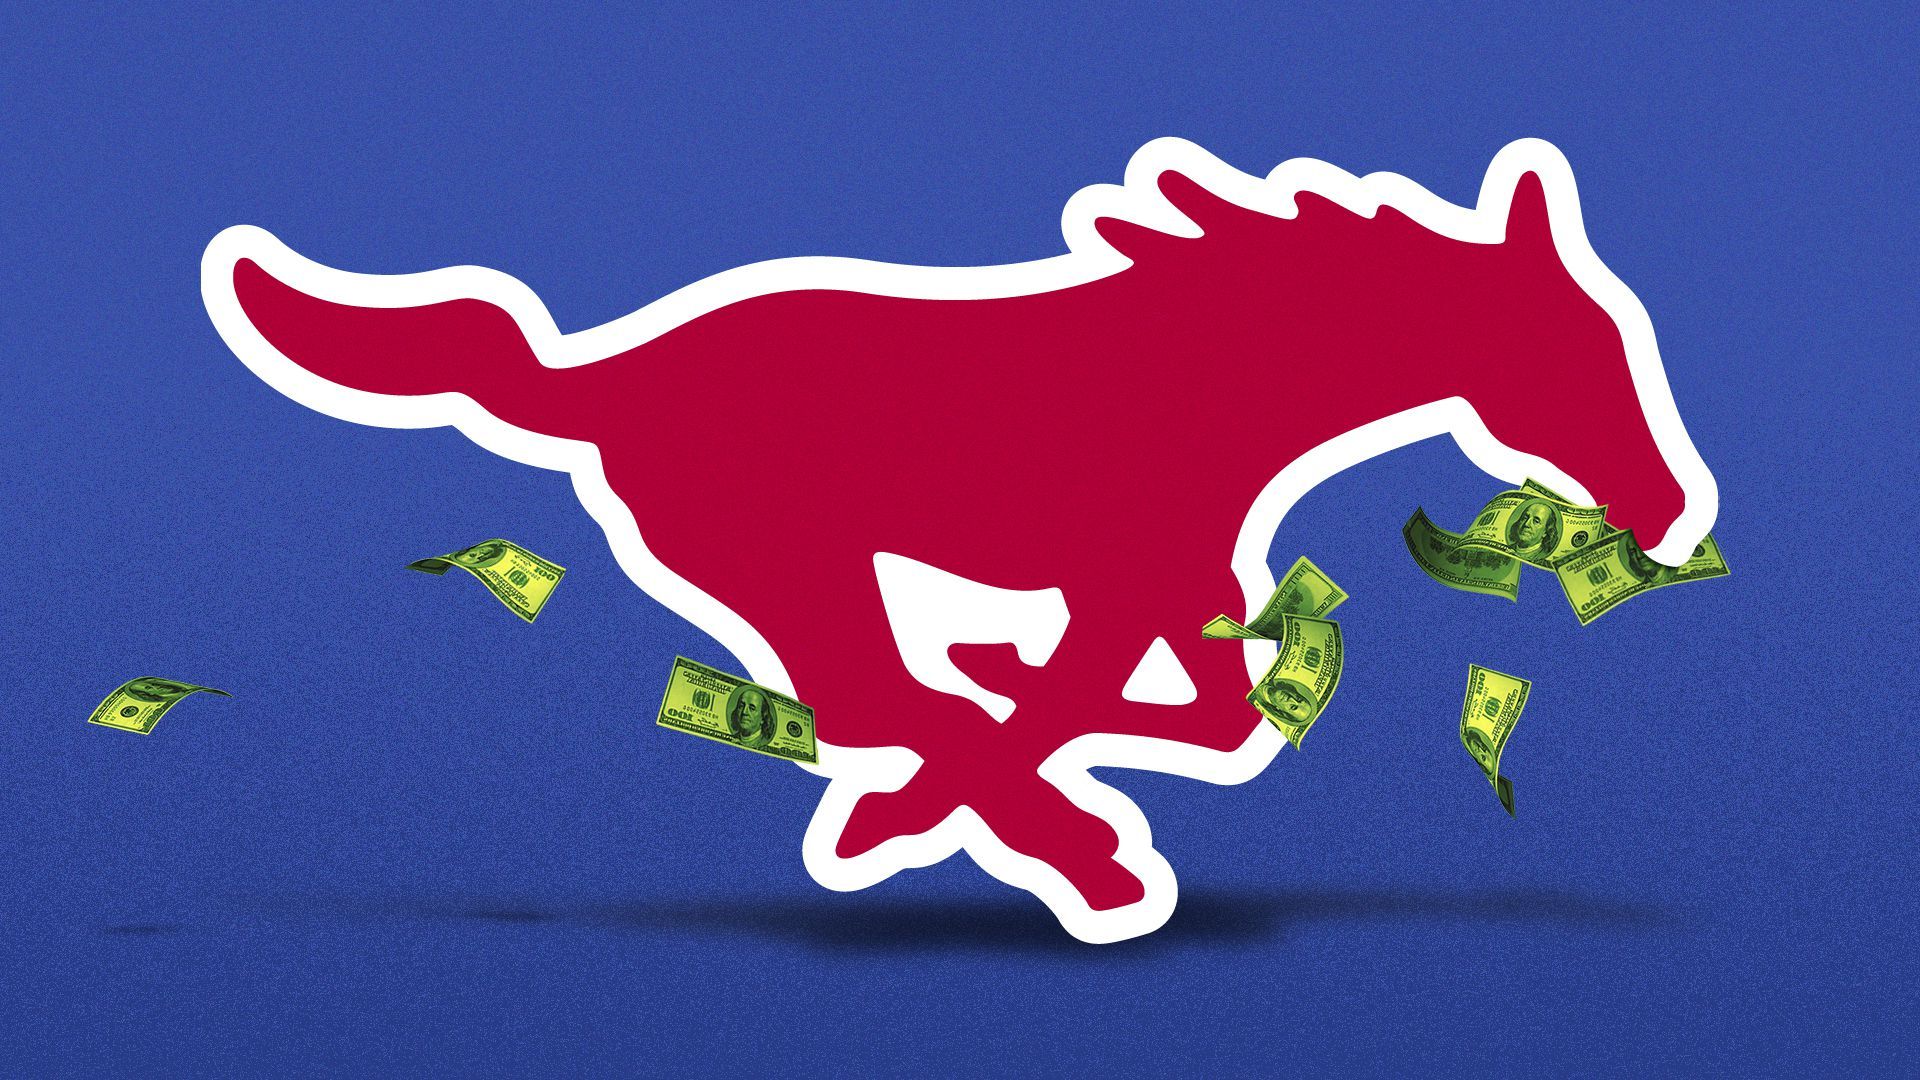 Illustration fo the SMU Mustang with money in its mouth.